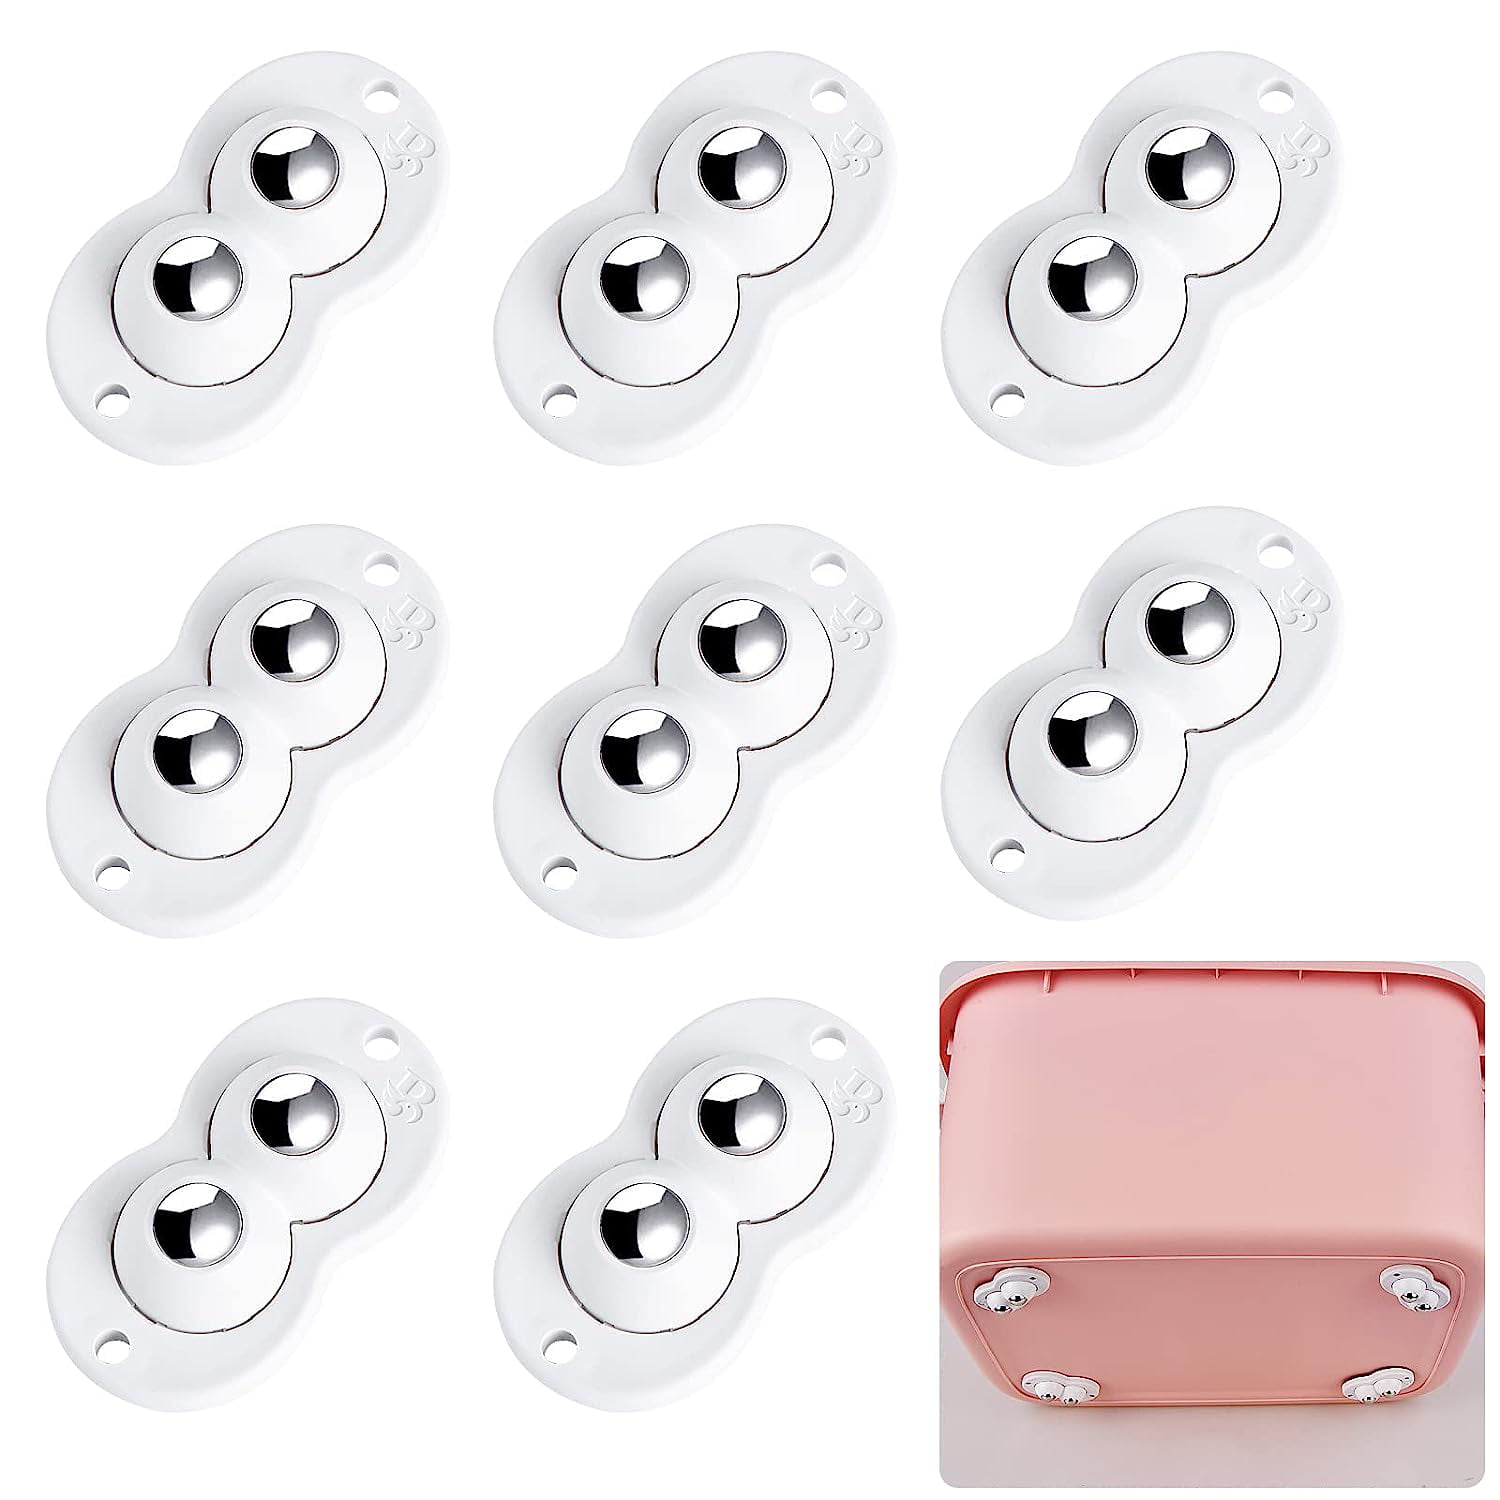 20 Pcs Replacement Caster Wheels Small Appliance Rollers Swivel Garbage Can